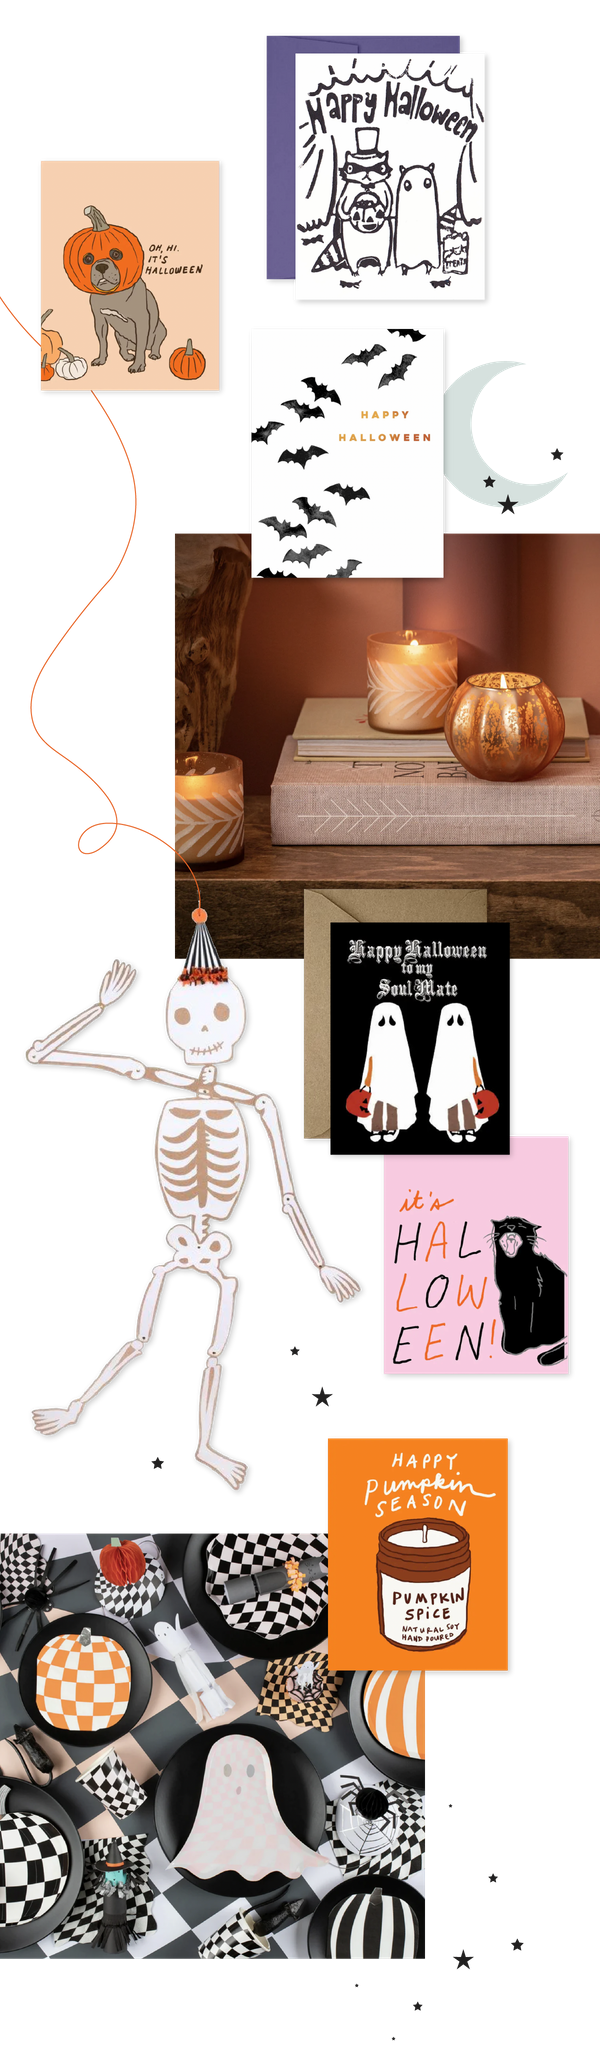 urbanic paper boutique los angeles california gifts stationery gift wrap halloween ghost skeleton pumpkin spice black cat